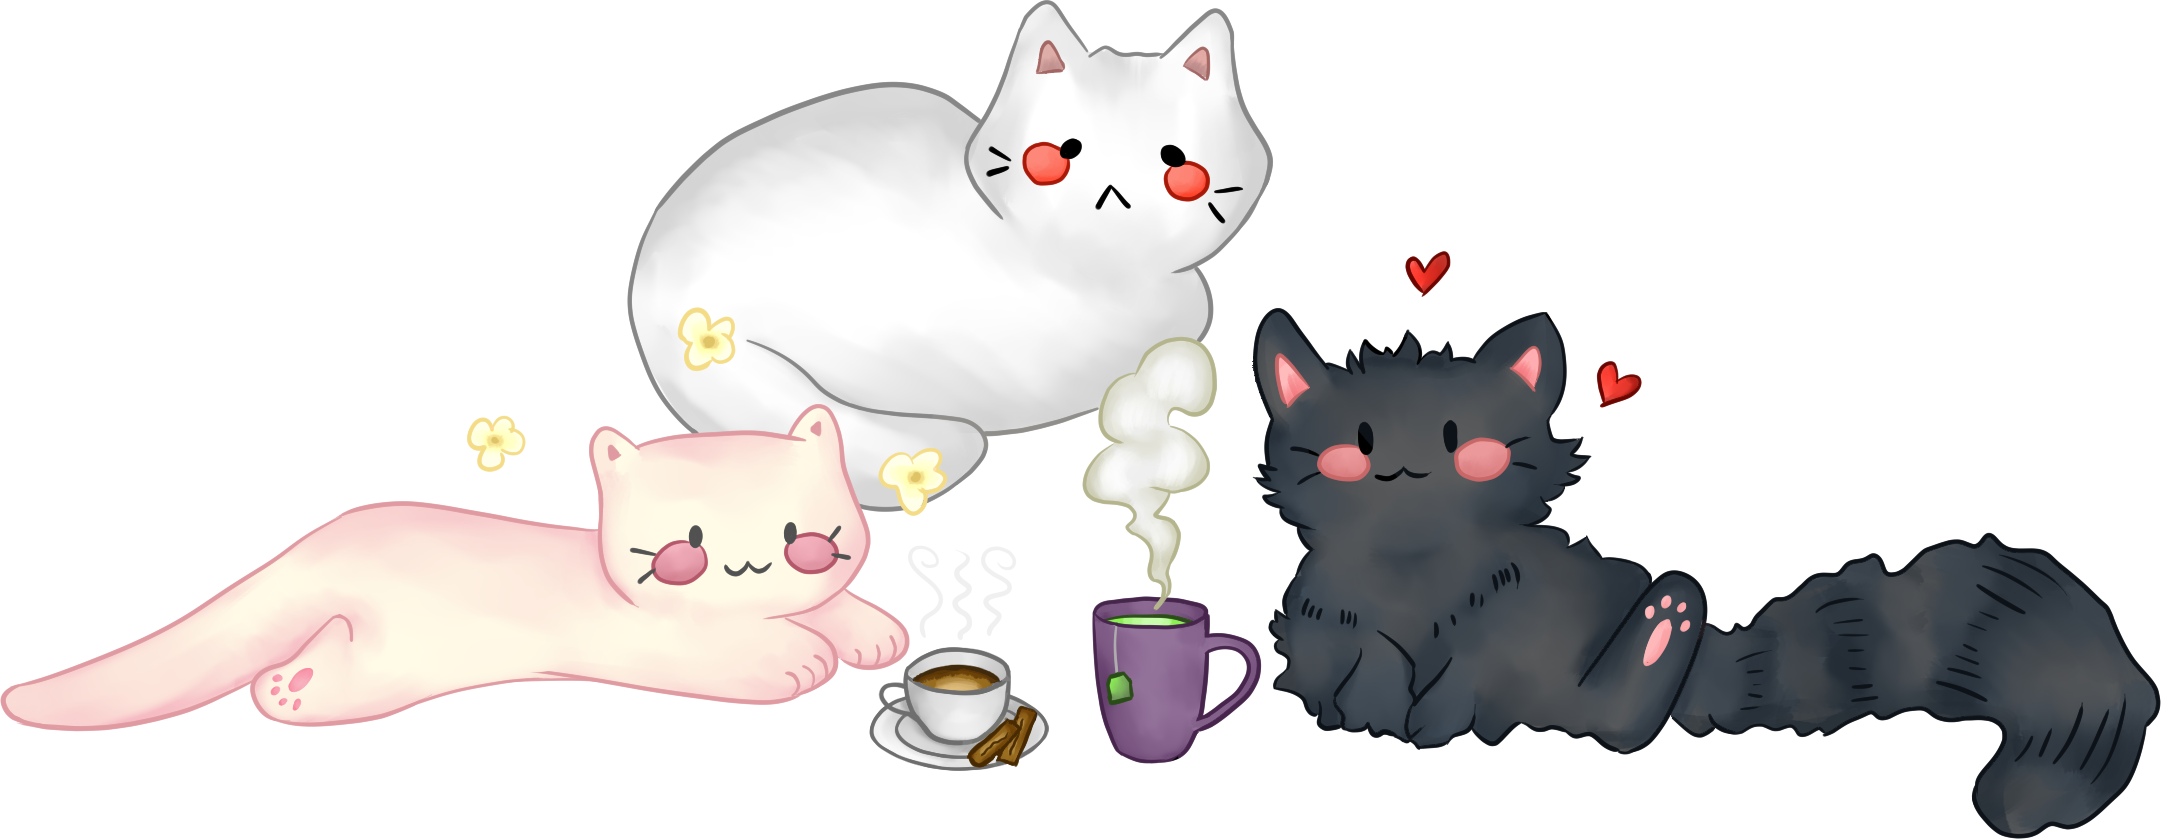 Three cats sharing tea and coffee together, CC-BY Brume